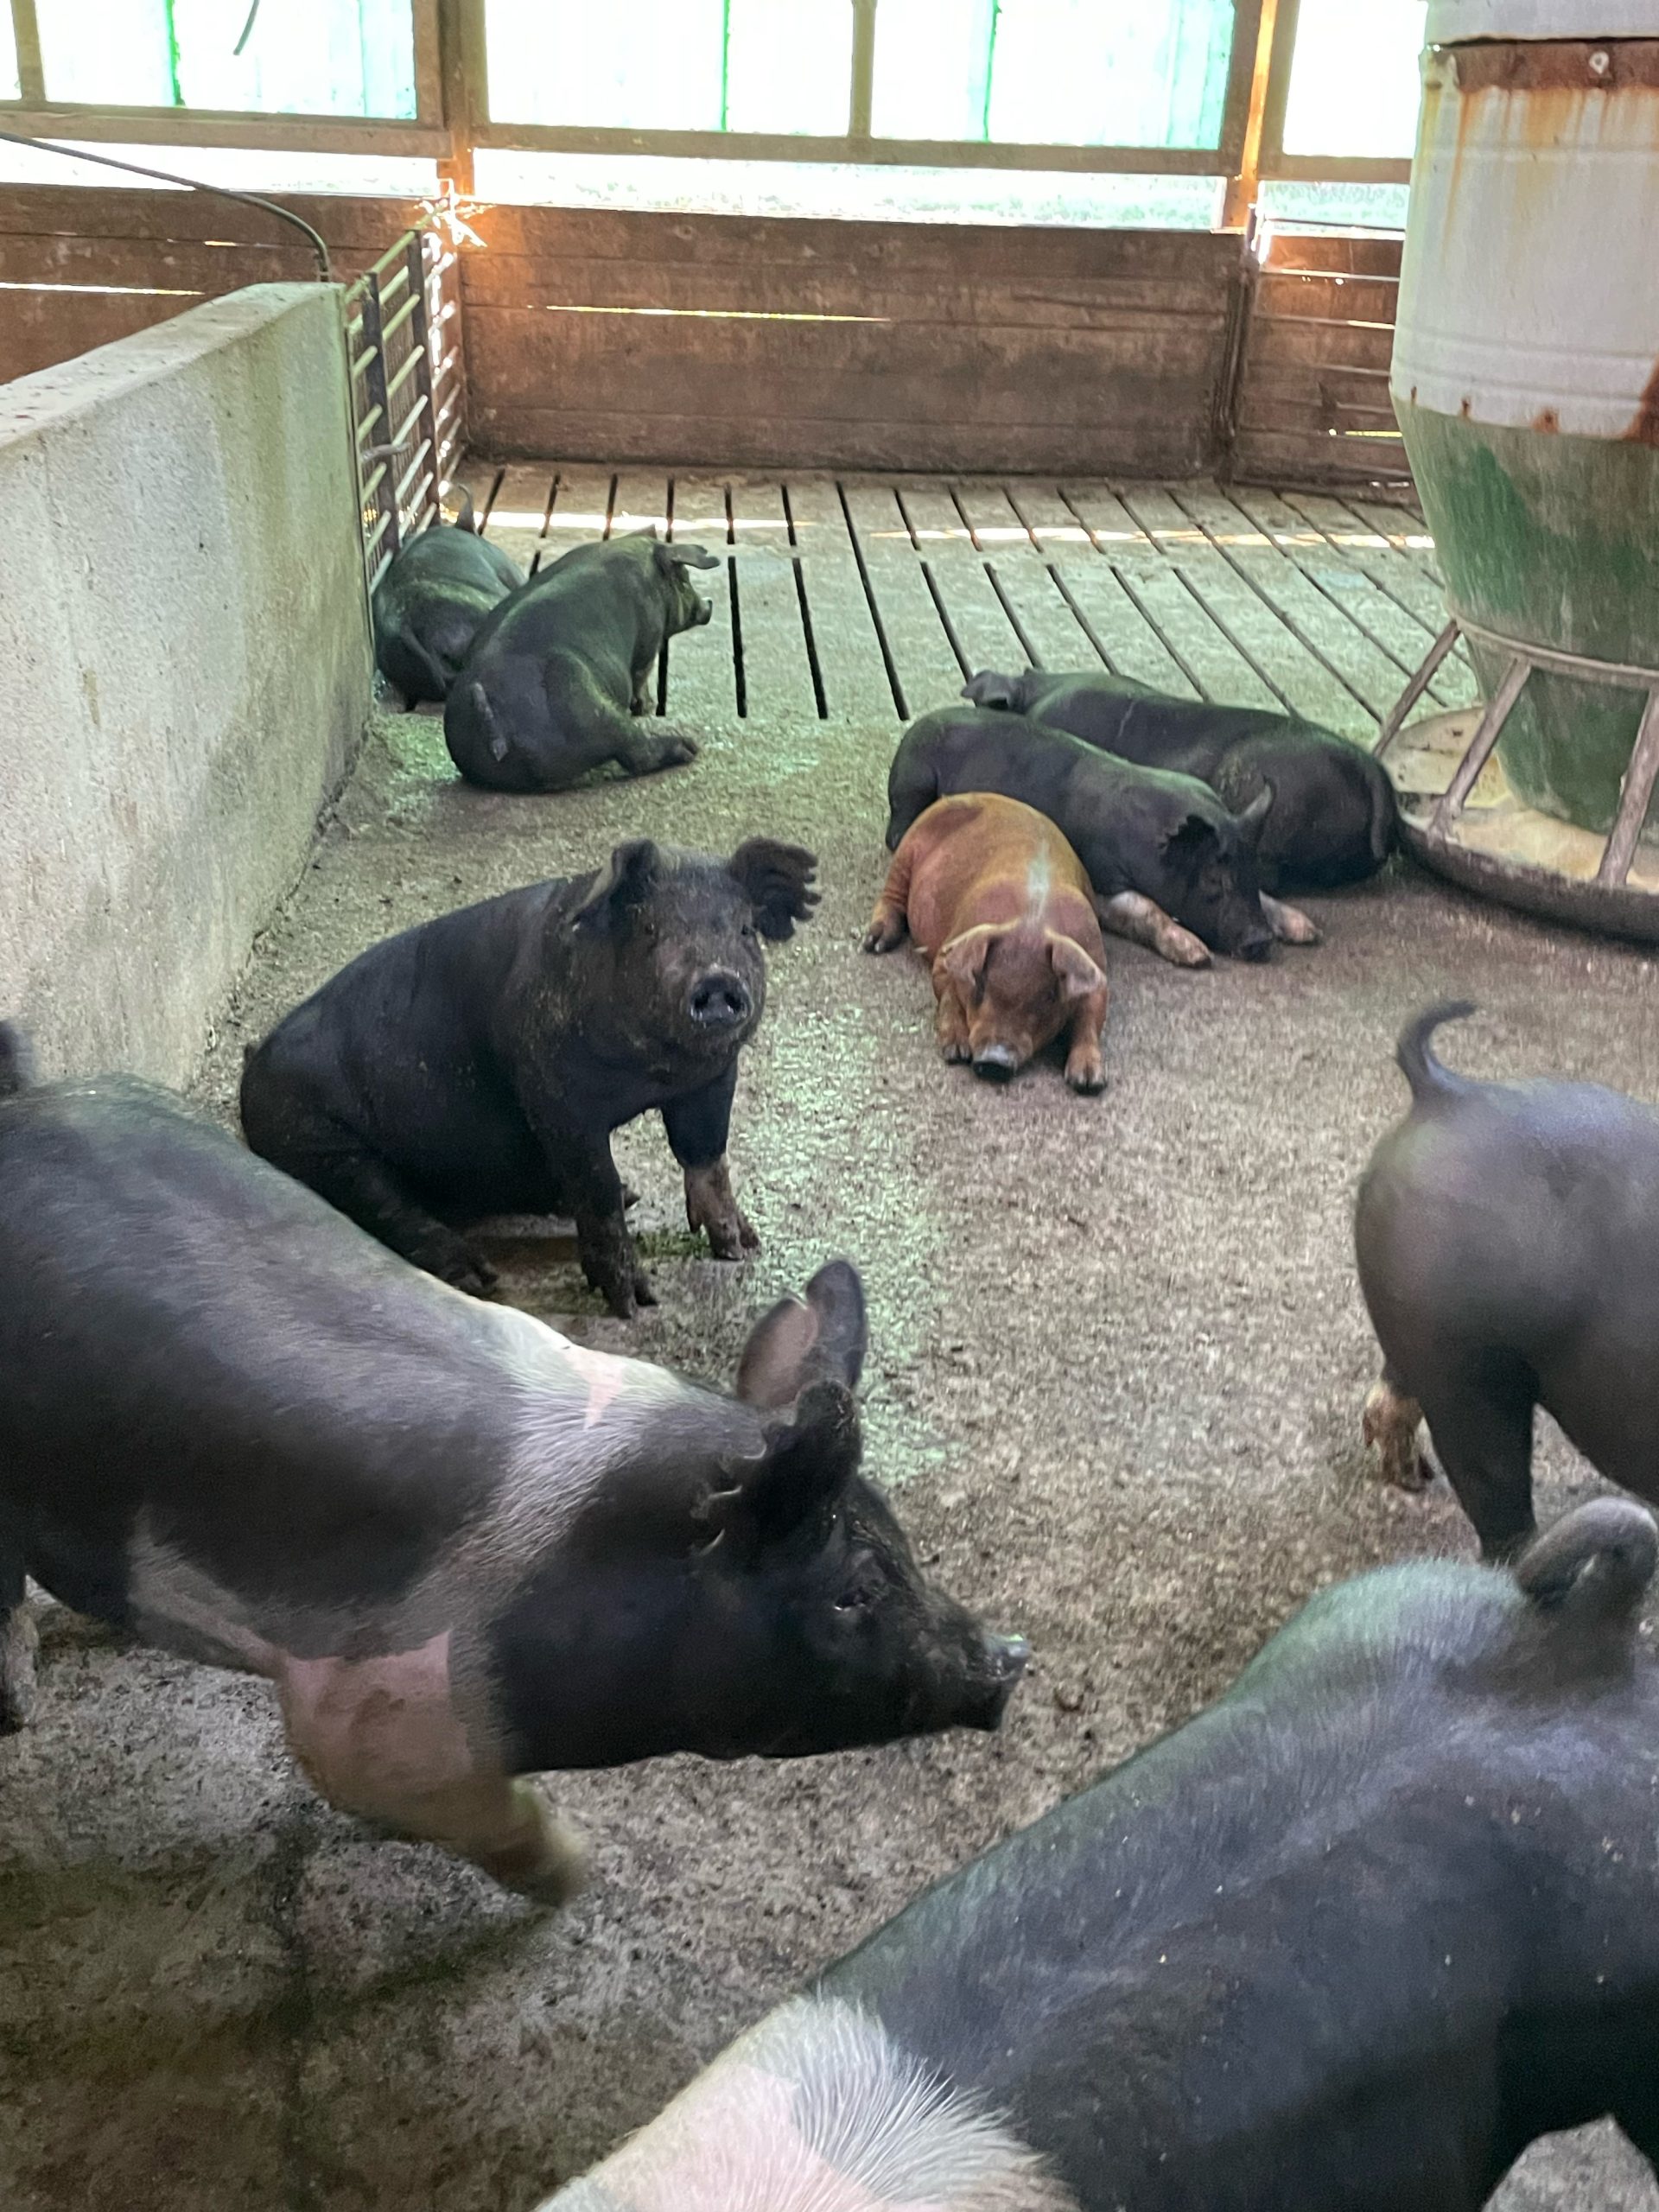 Two pigs sitting amongst a group. (Journal photo by Natalie Sleichter.)